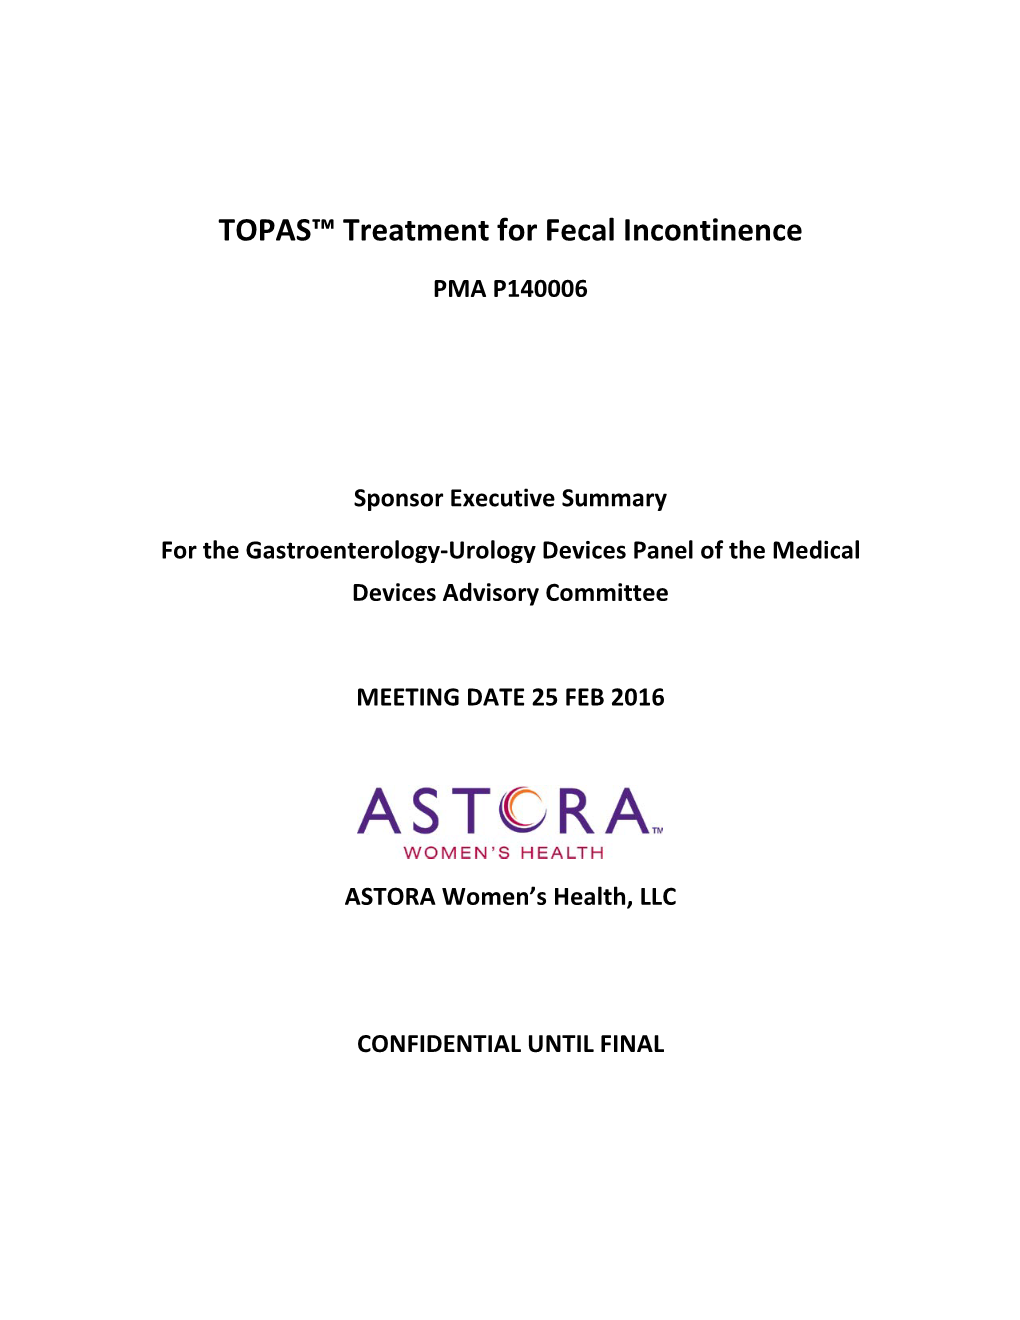 TOPAS™ Treatment for Fecal Incontinence